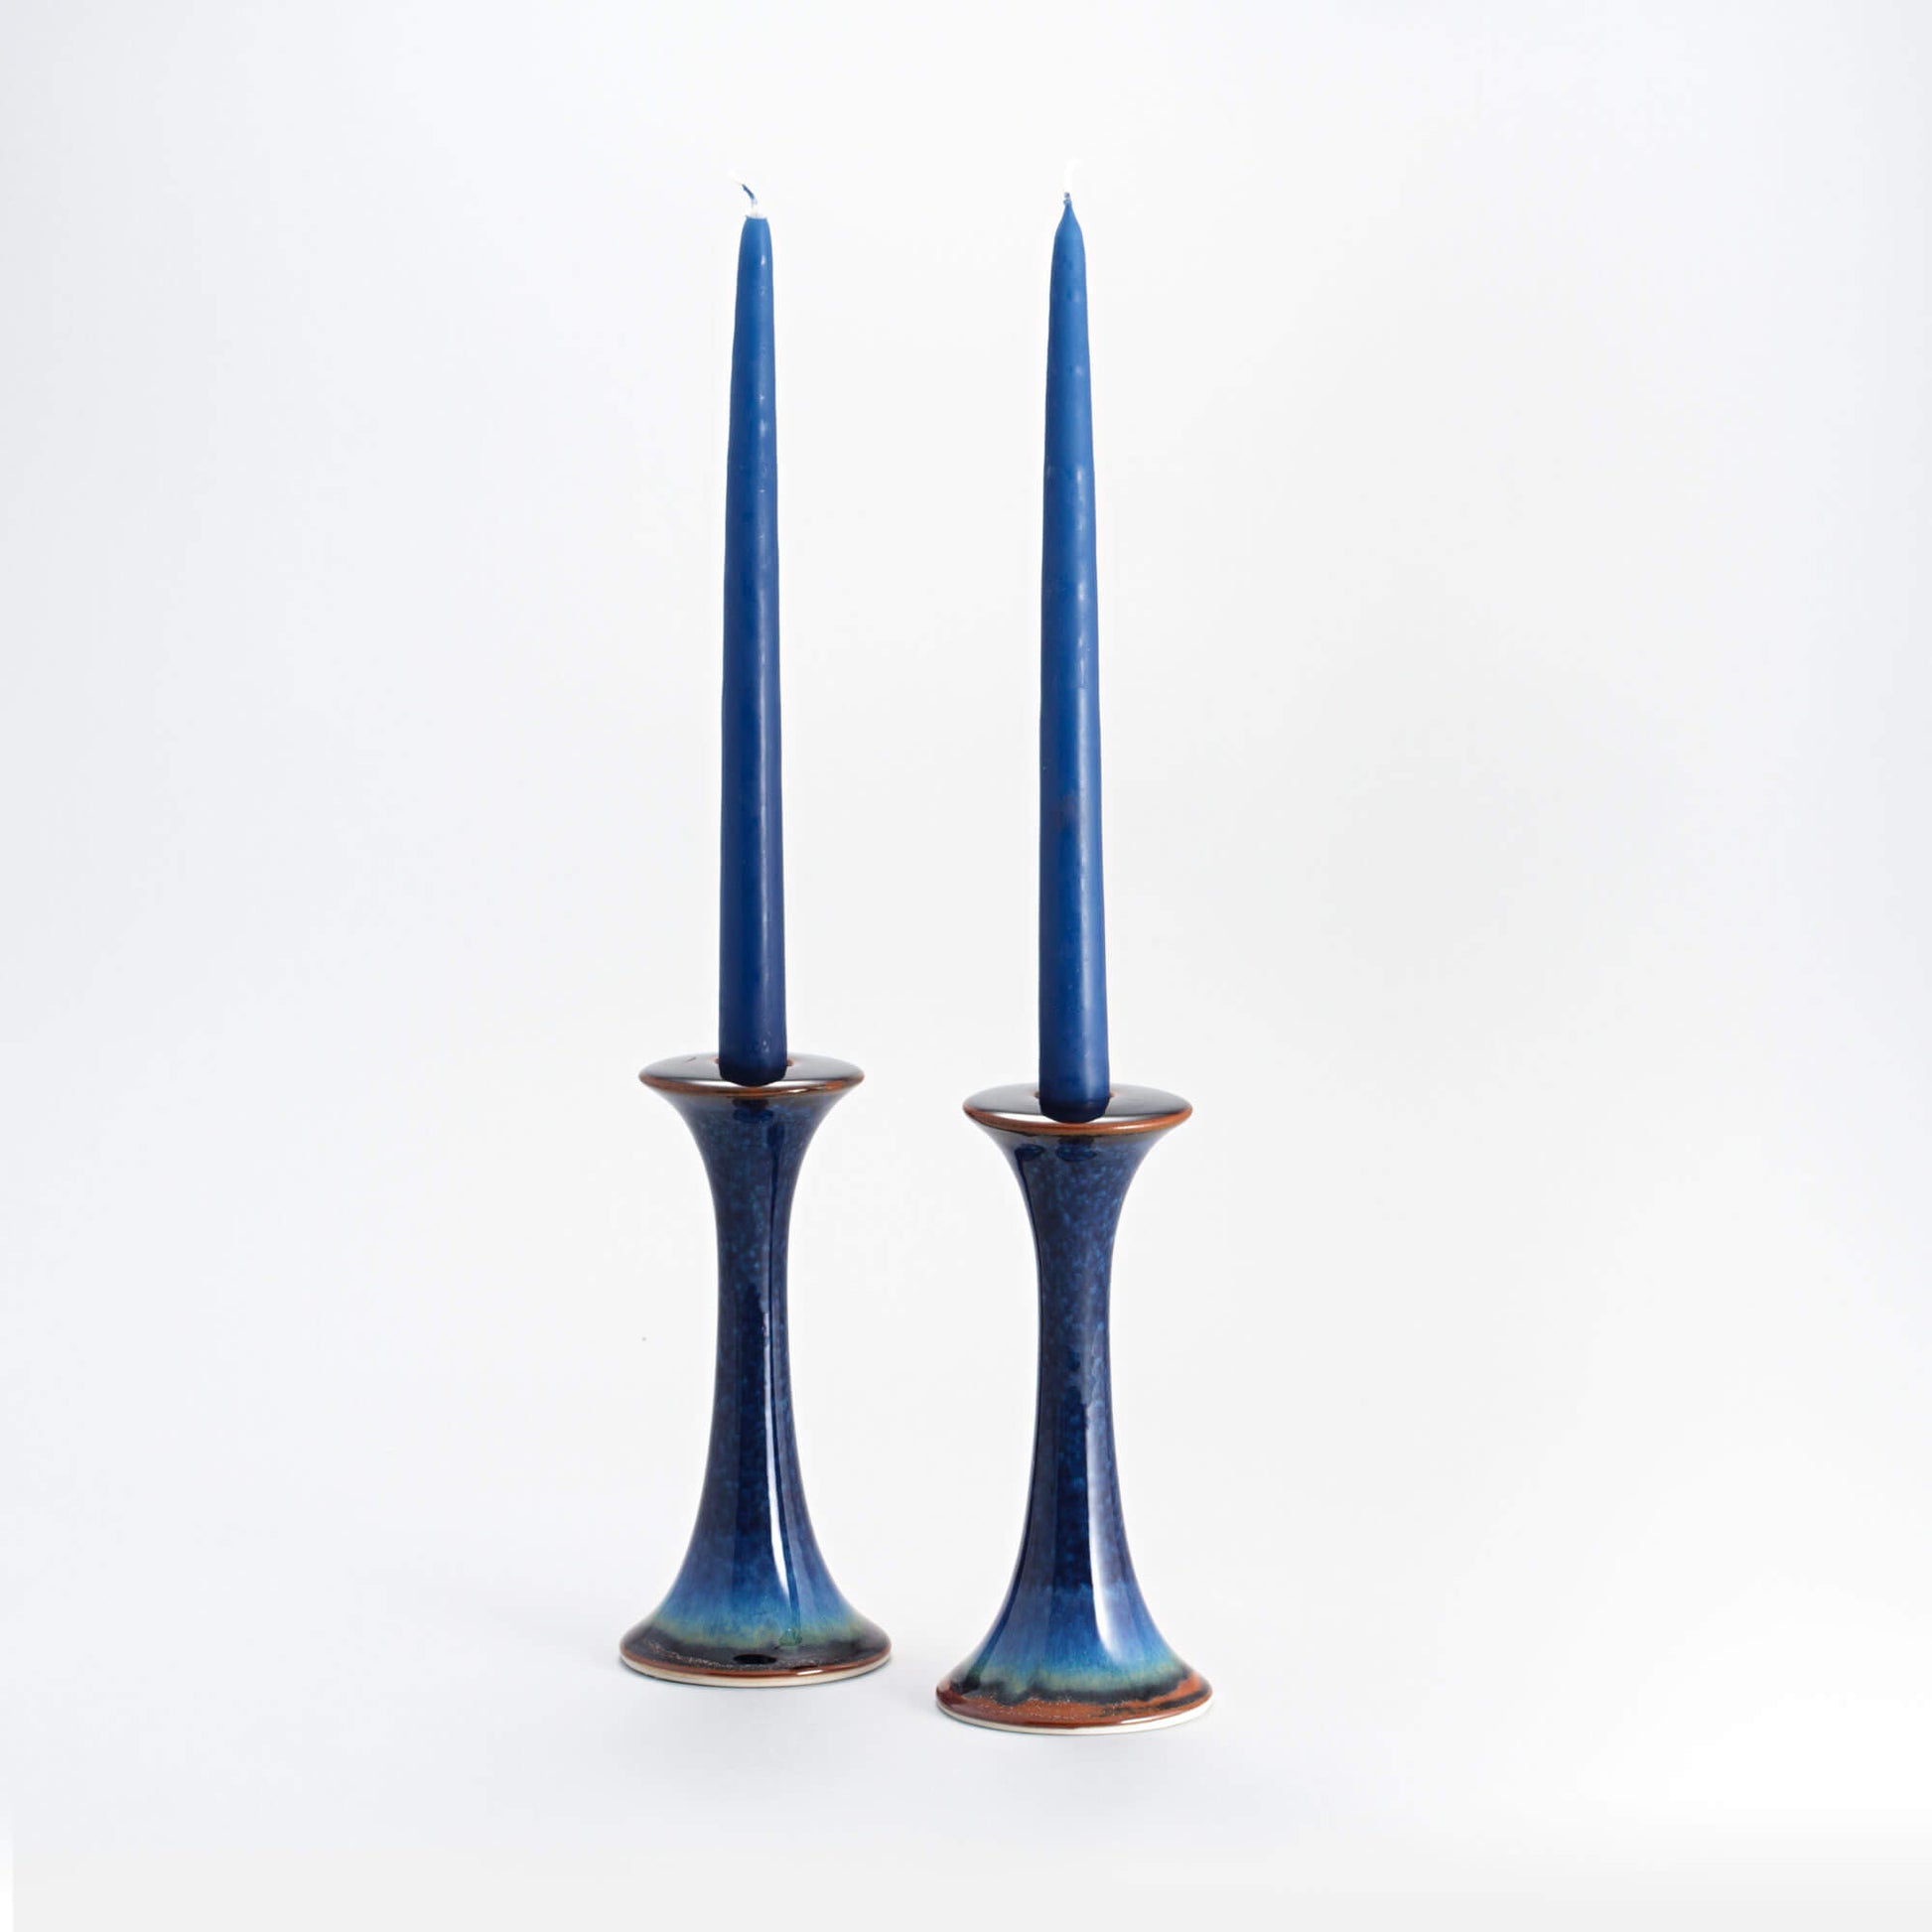 Handmade Pottery Candlestick Holders in Blue Hamada pattern made by Georgetown Pottery in Maine